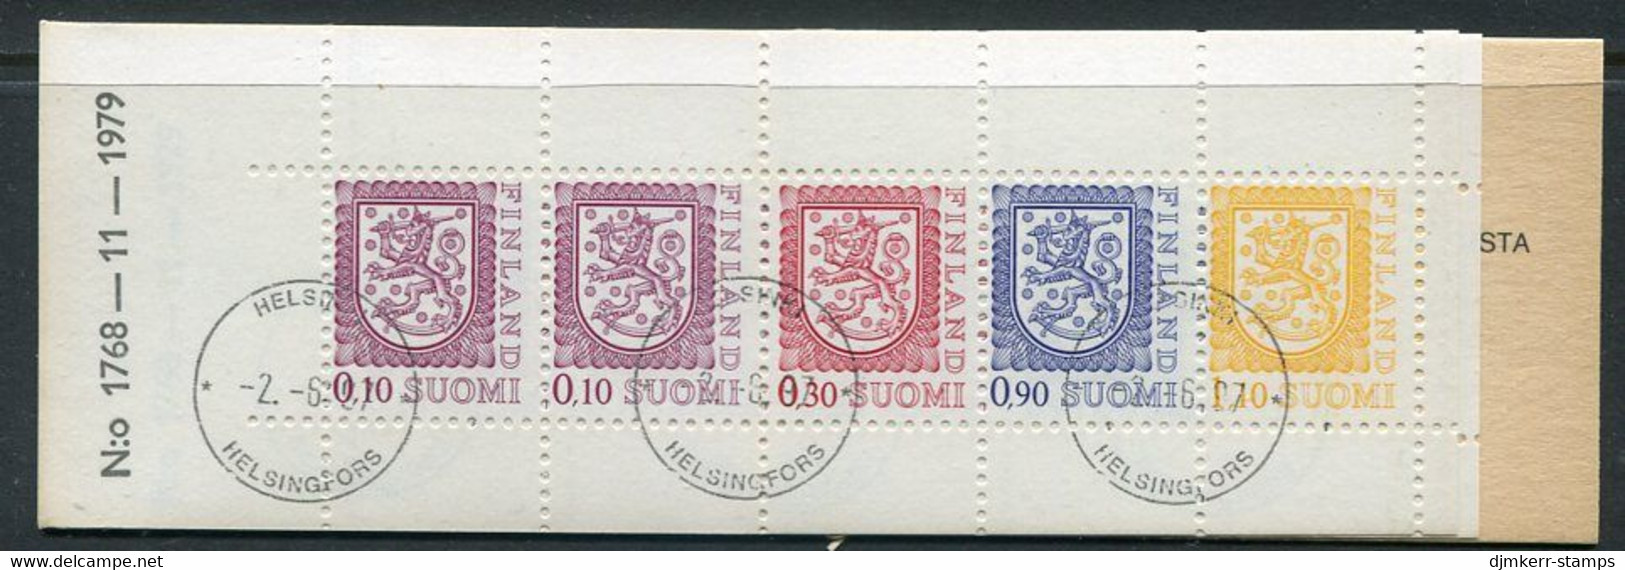 FINLAND 1980 Lion Definitive Type I 5 Mk. Complete Booklet Cancelled.  Michel MH 12 I - Booklets